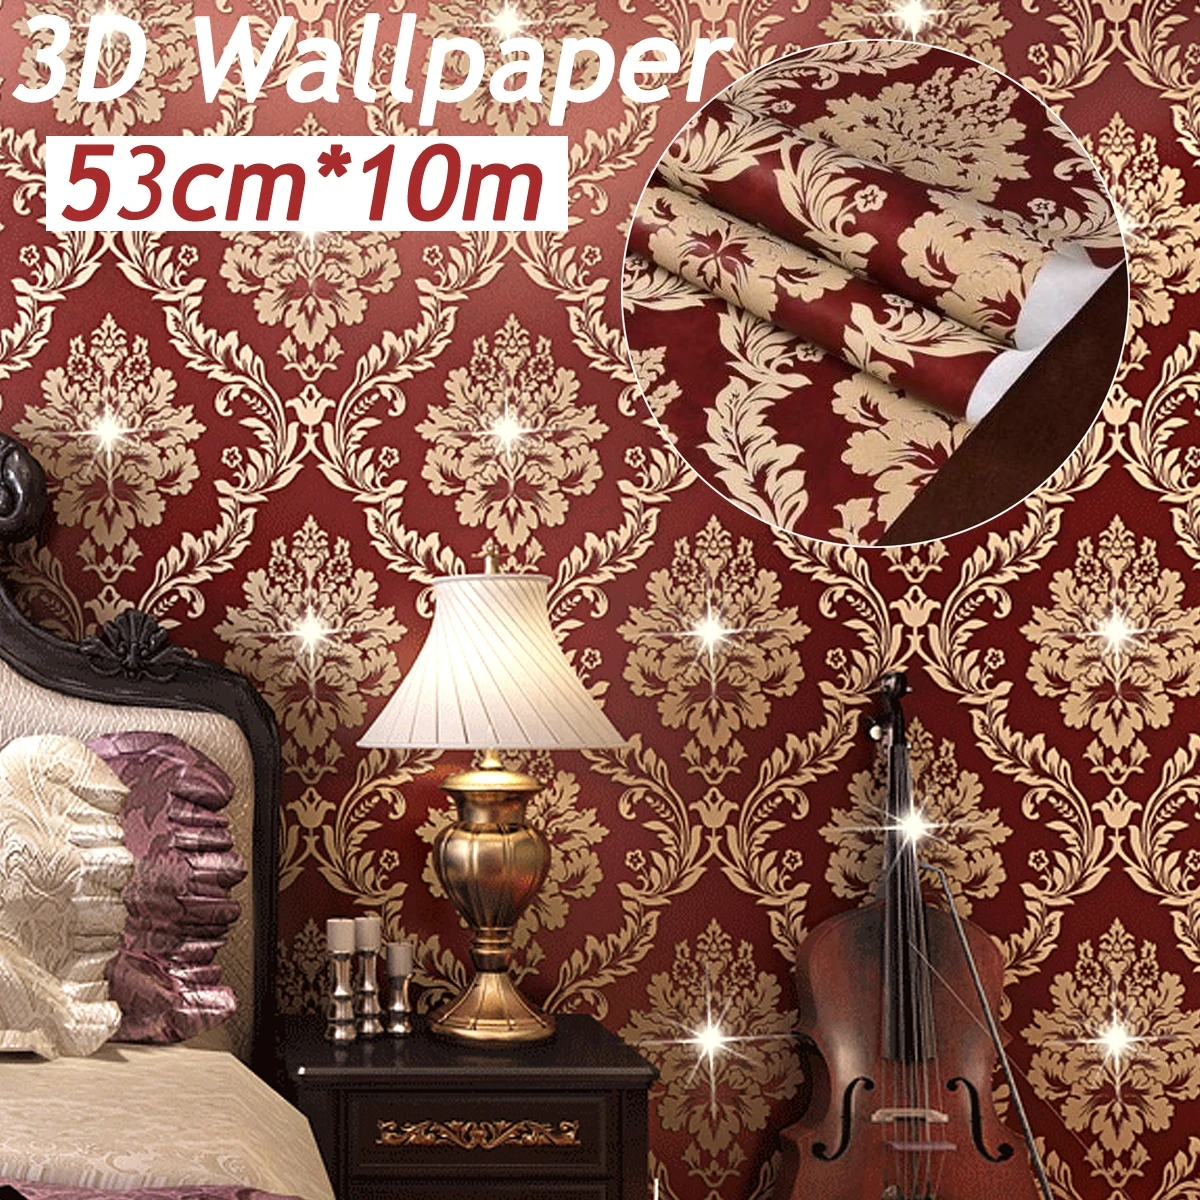 10M New Crystals European Gold Damask Embossed Textured Non-woven Wallpaper Roll 